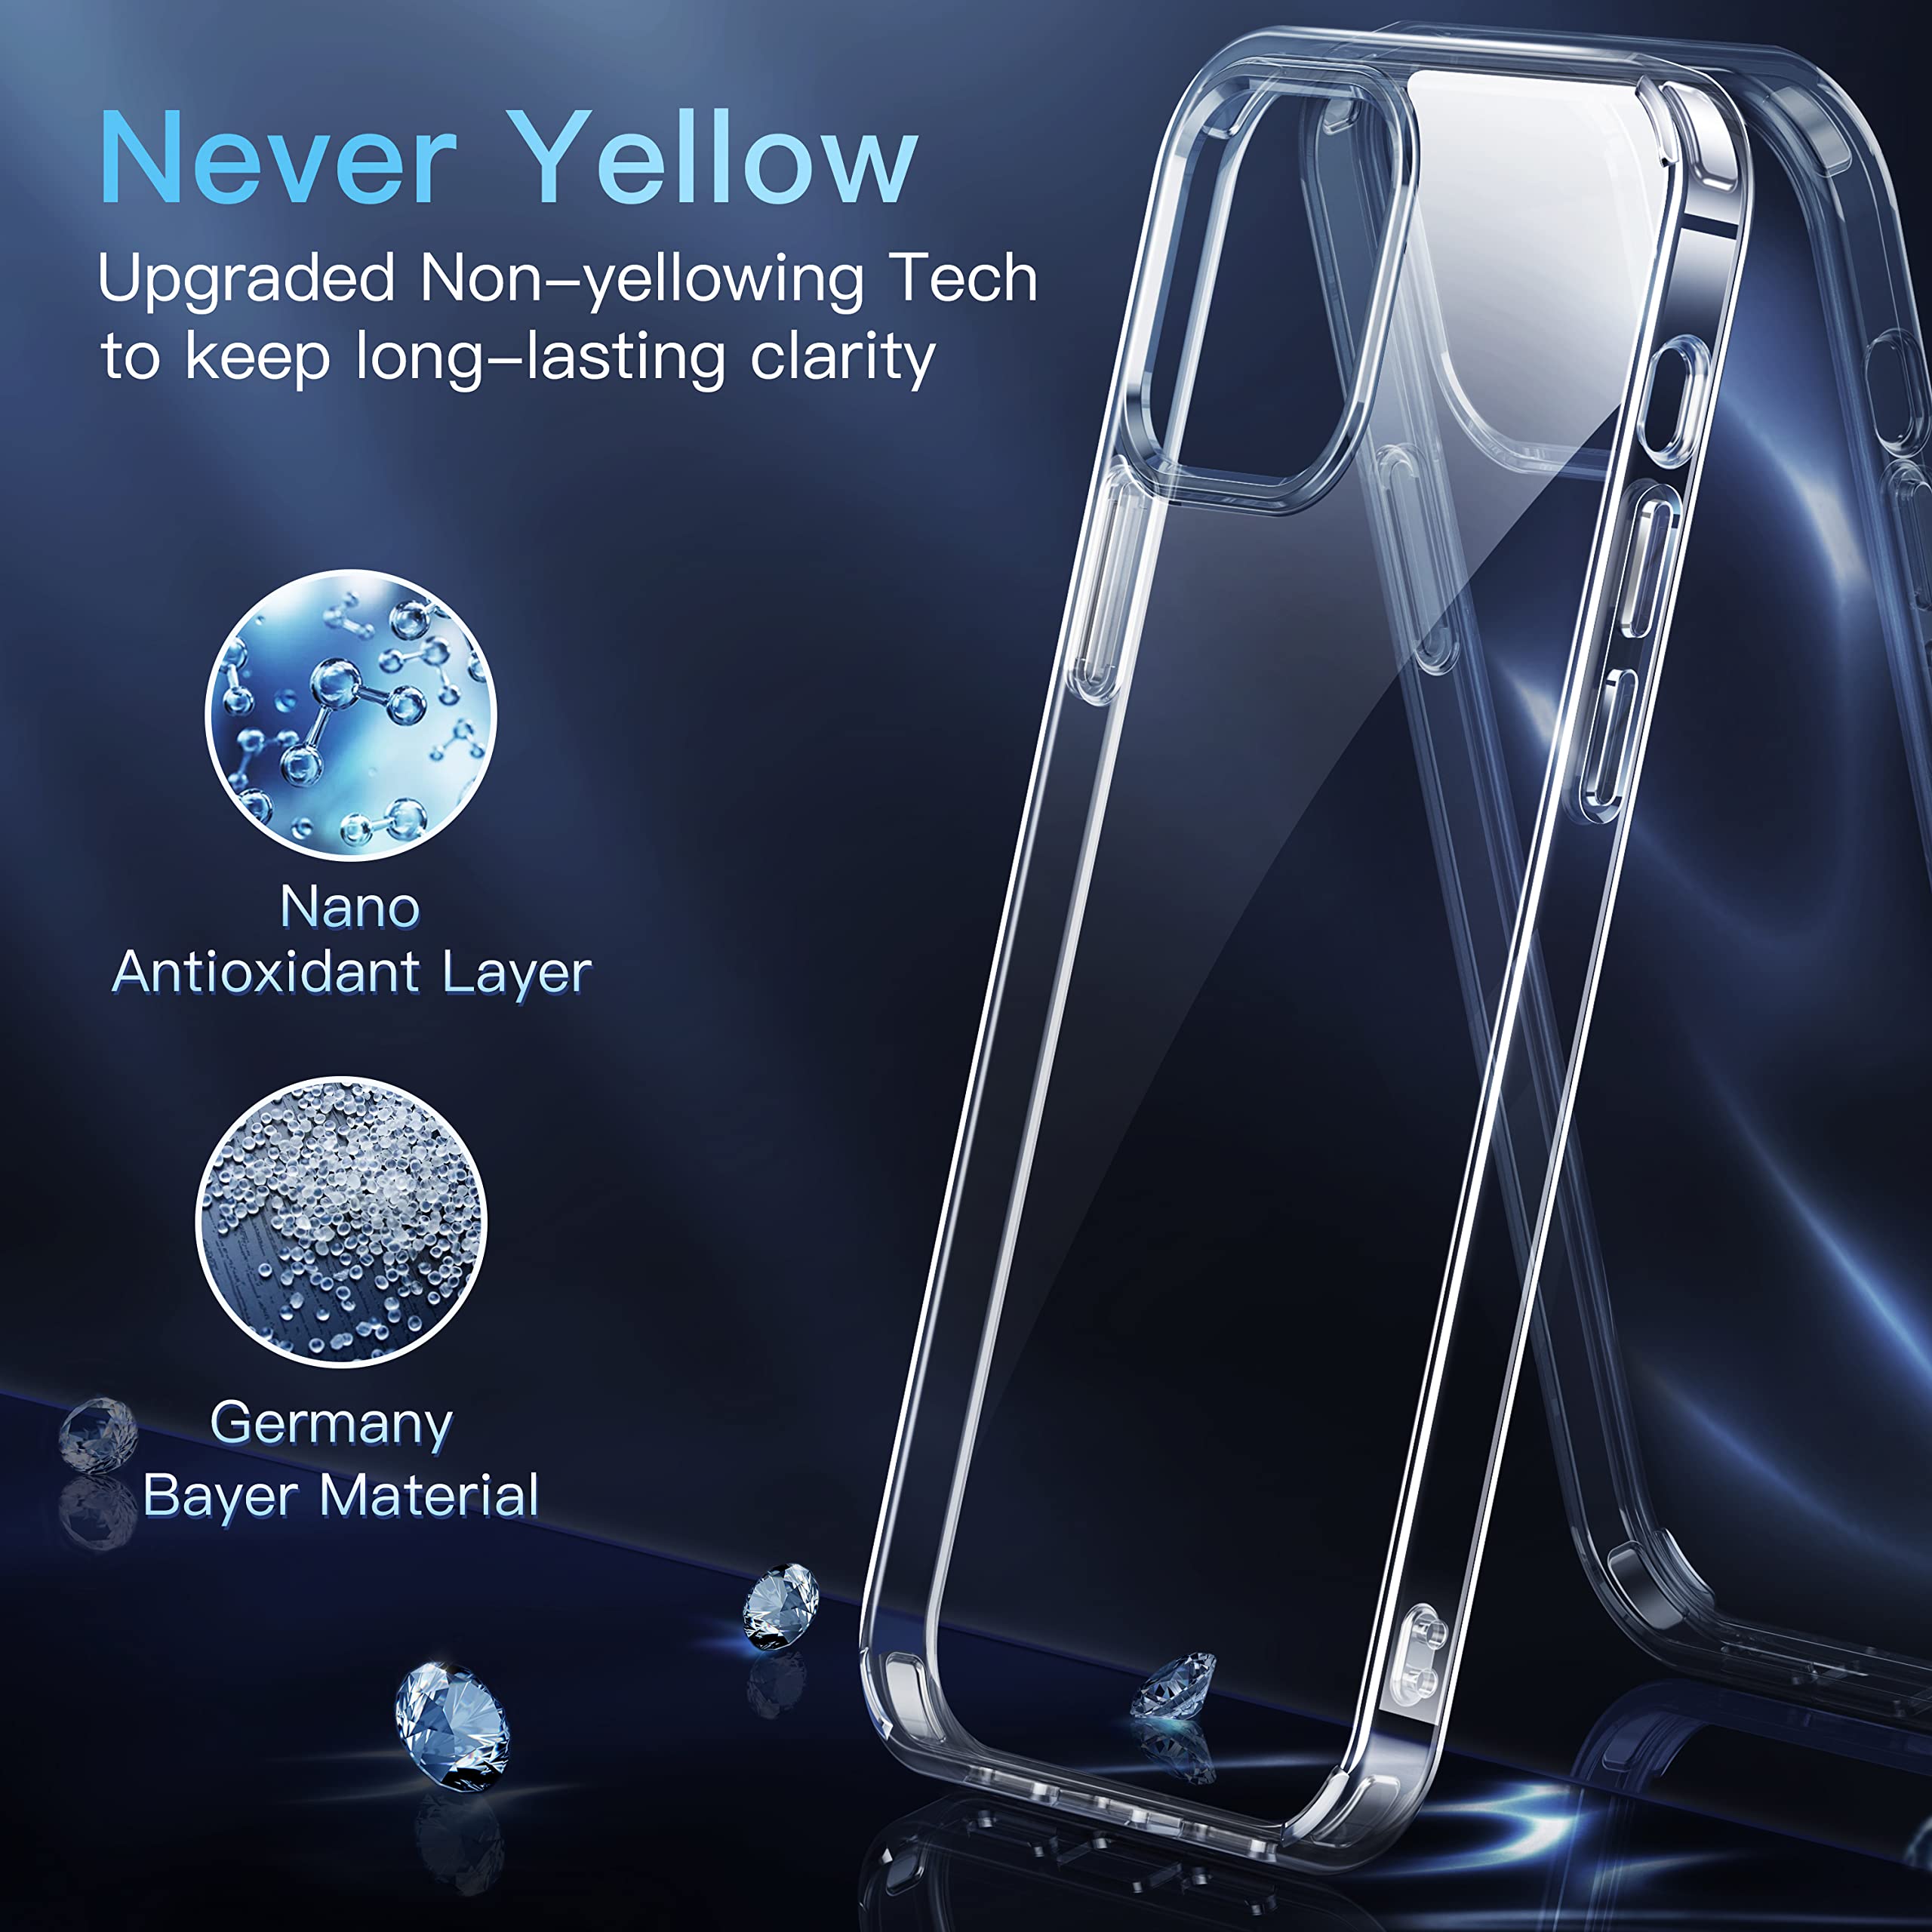 CASEKOO Crystal Clear for iPhone 12/12 Pro Case, [Not Yellowing] [Military Grade Drop Tested] Shockproof Protective Phone Case Slim Thin Cover 5G 6.1 inch 2020, Clear